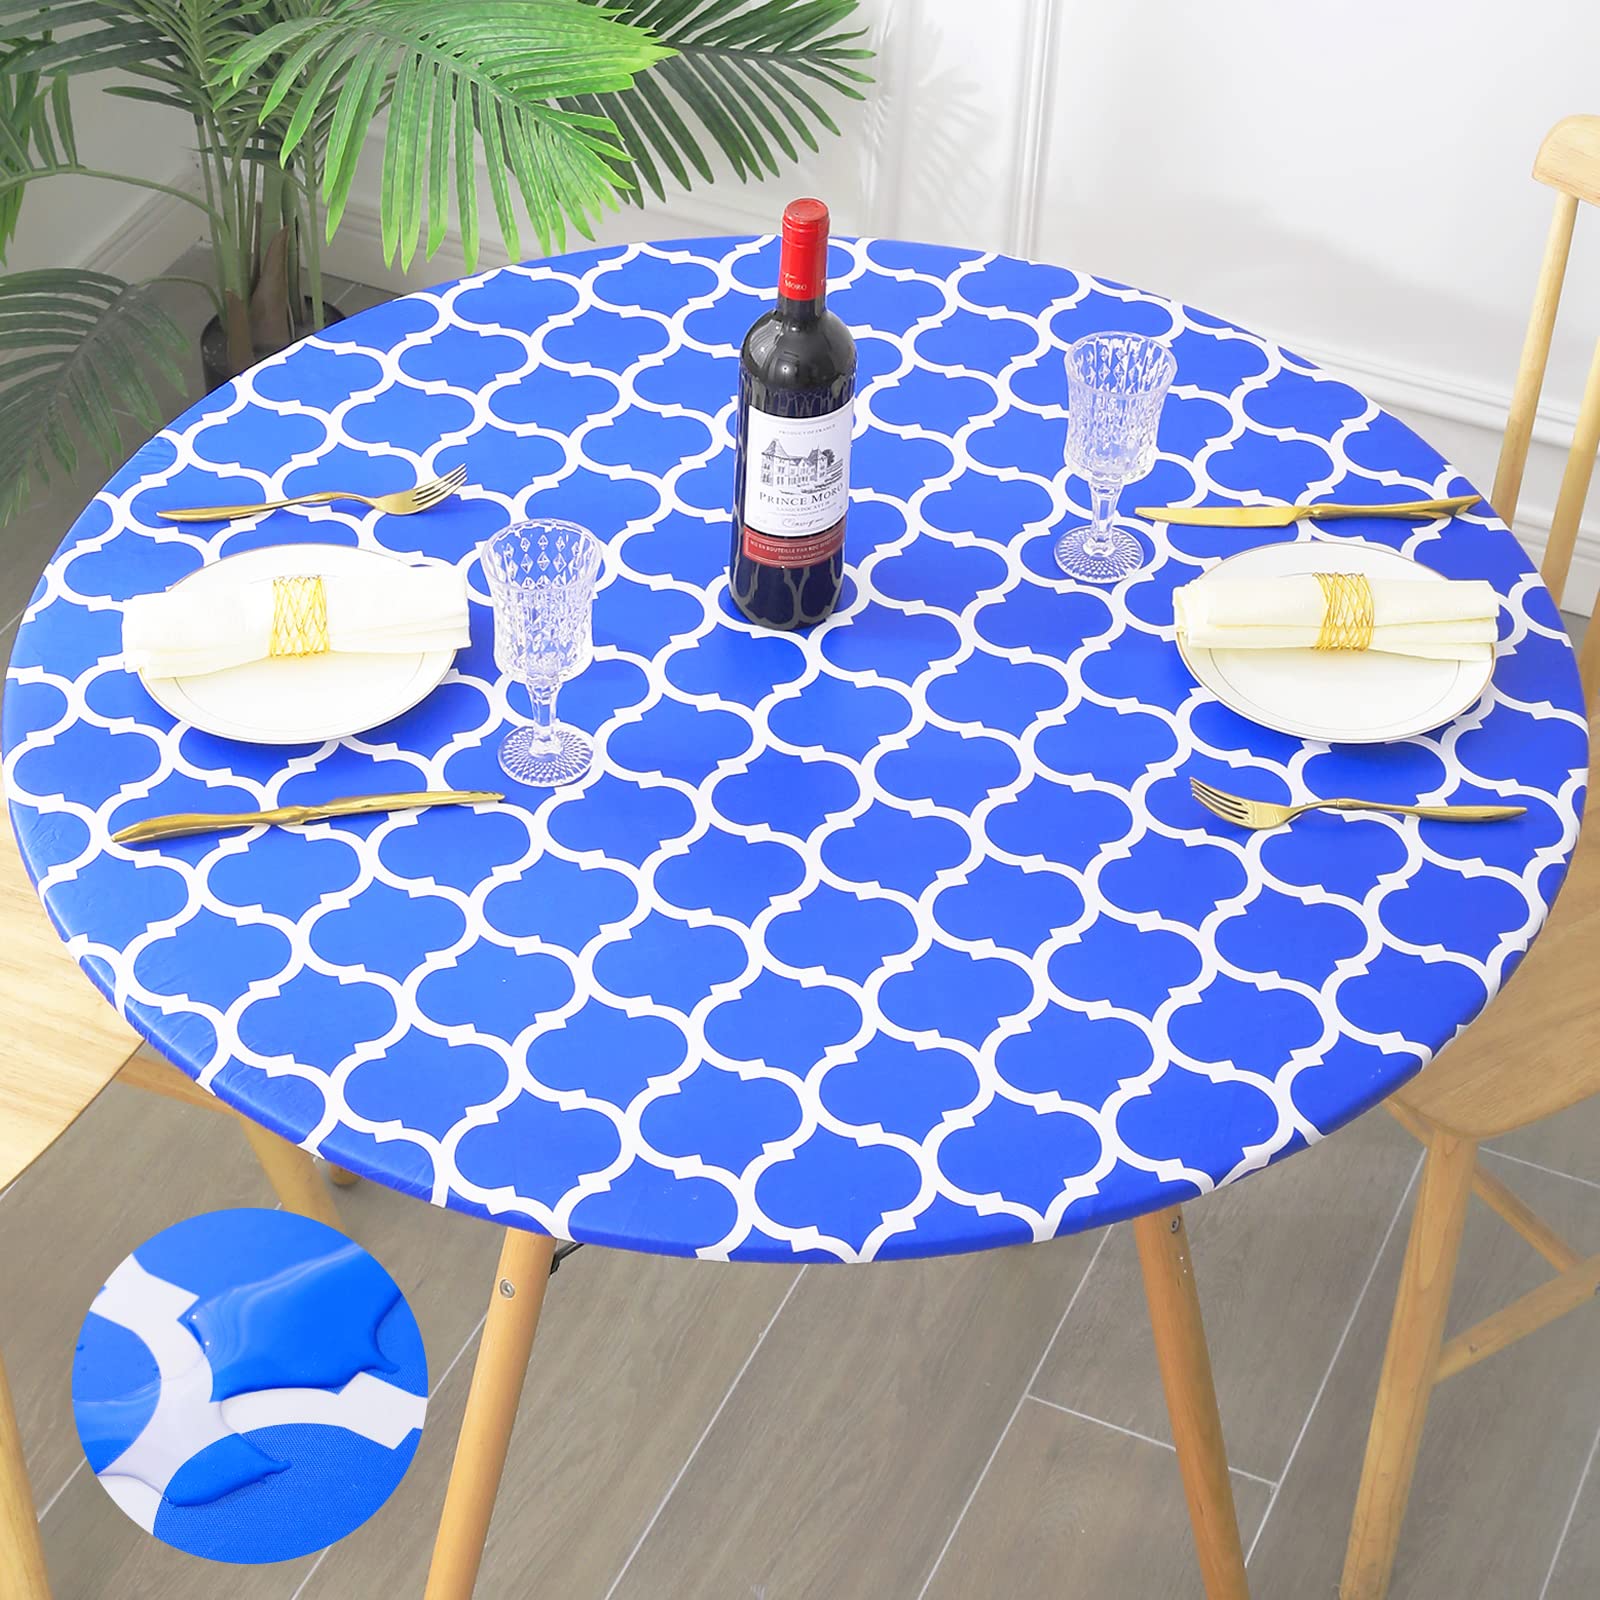 smiry Round Tablecloth, Waterproof Elastic Fitted Table Covers for 57" - 68" Tables, Wipeable Flannel Backed Vinyl Tablecloths f